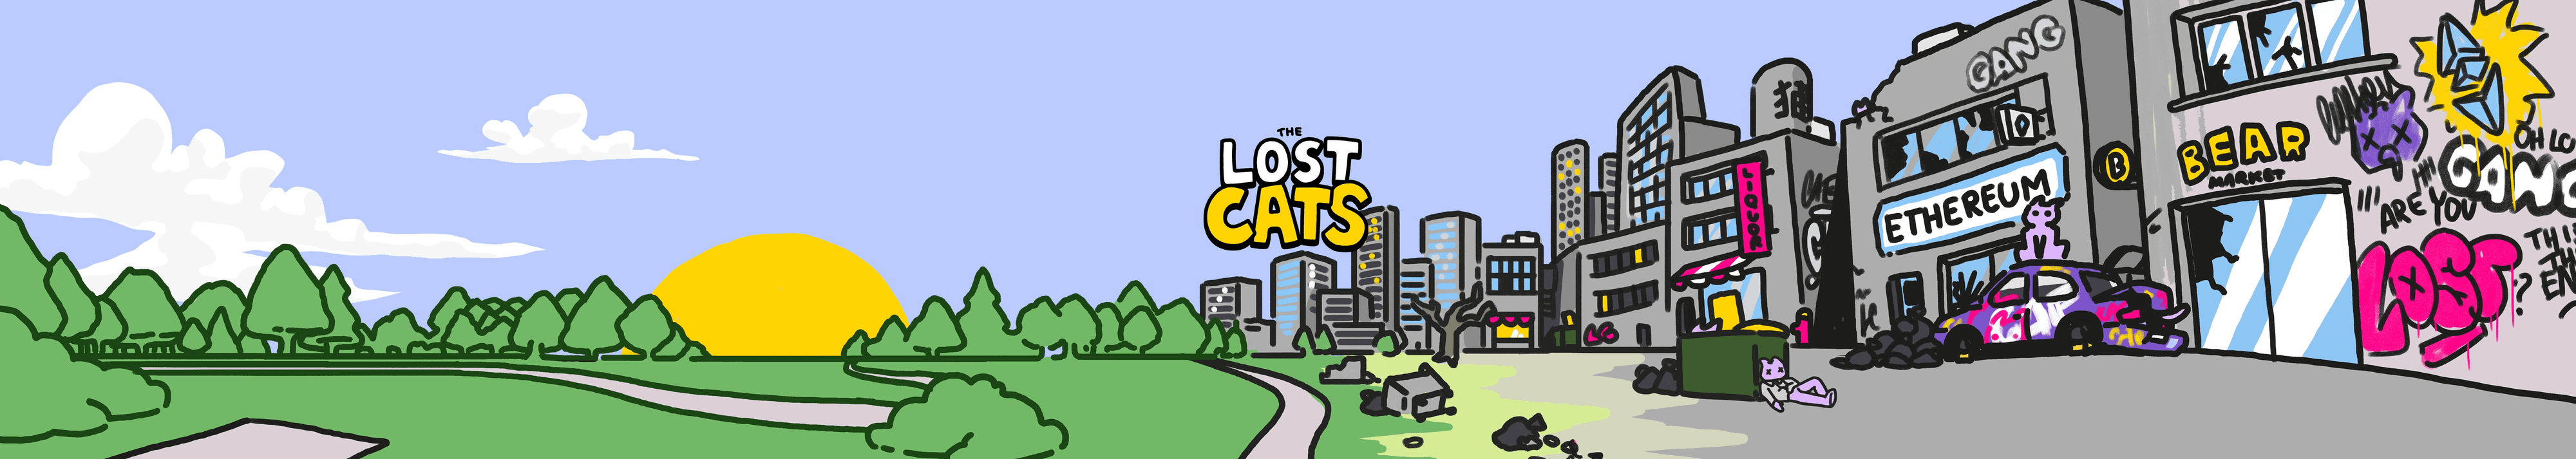 THE_LOST_CATS_VAULT 橫幅